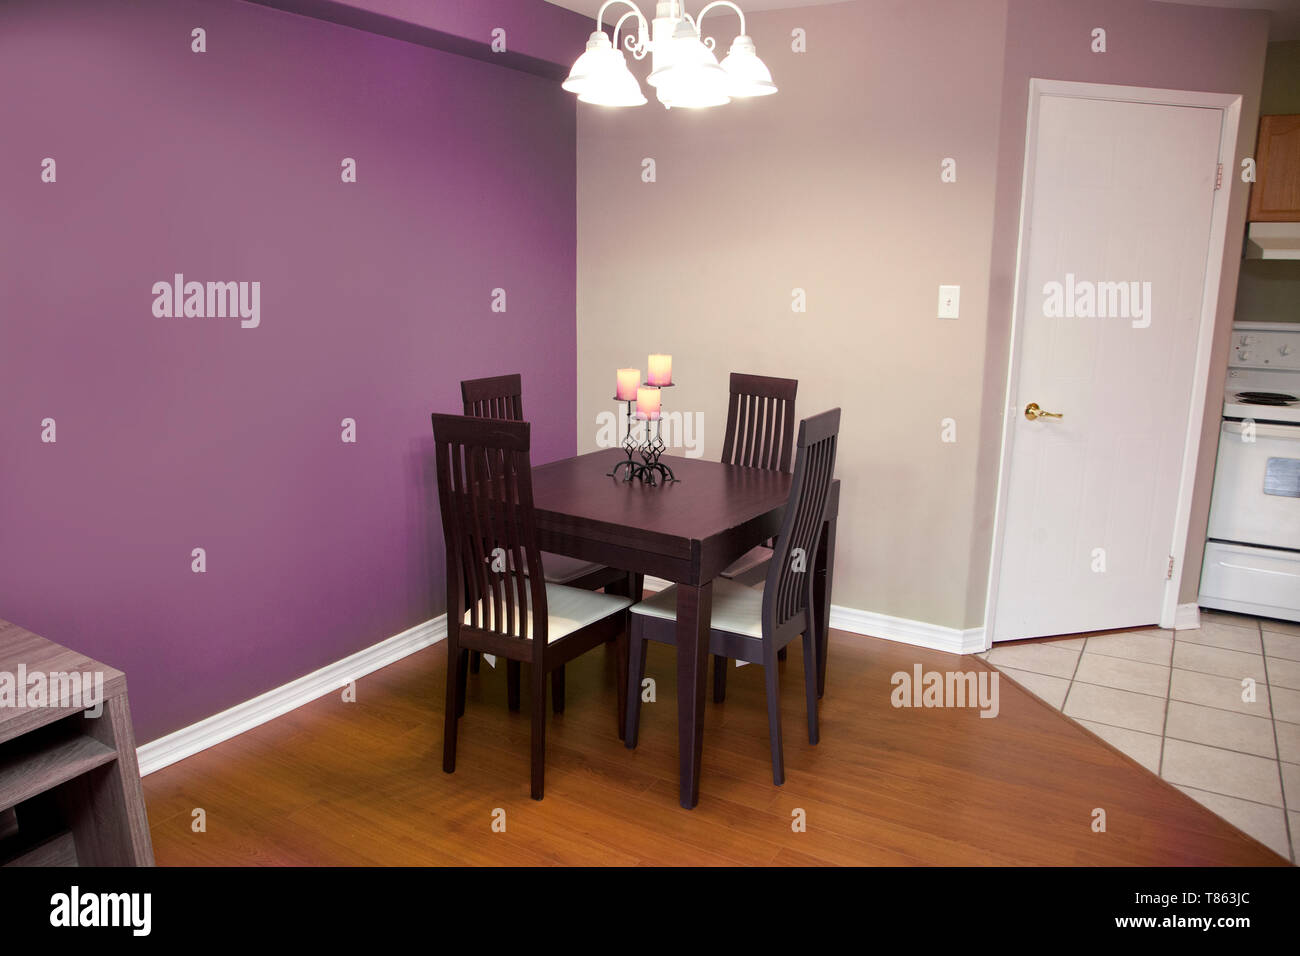 purple walls with a dark wood table and chair set for four in a kitchen or dining area of a home Stock Photo